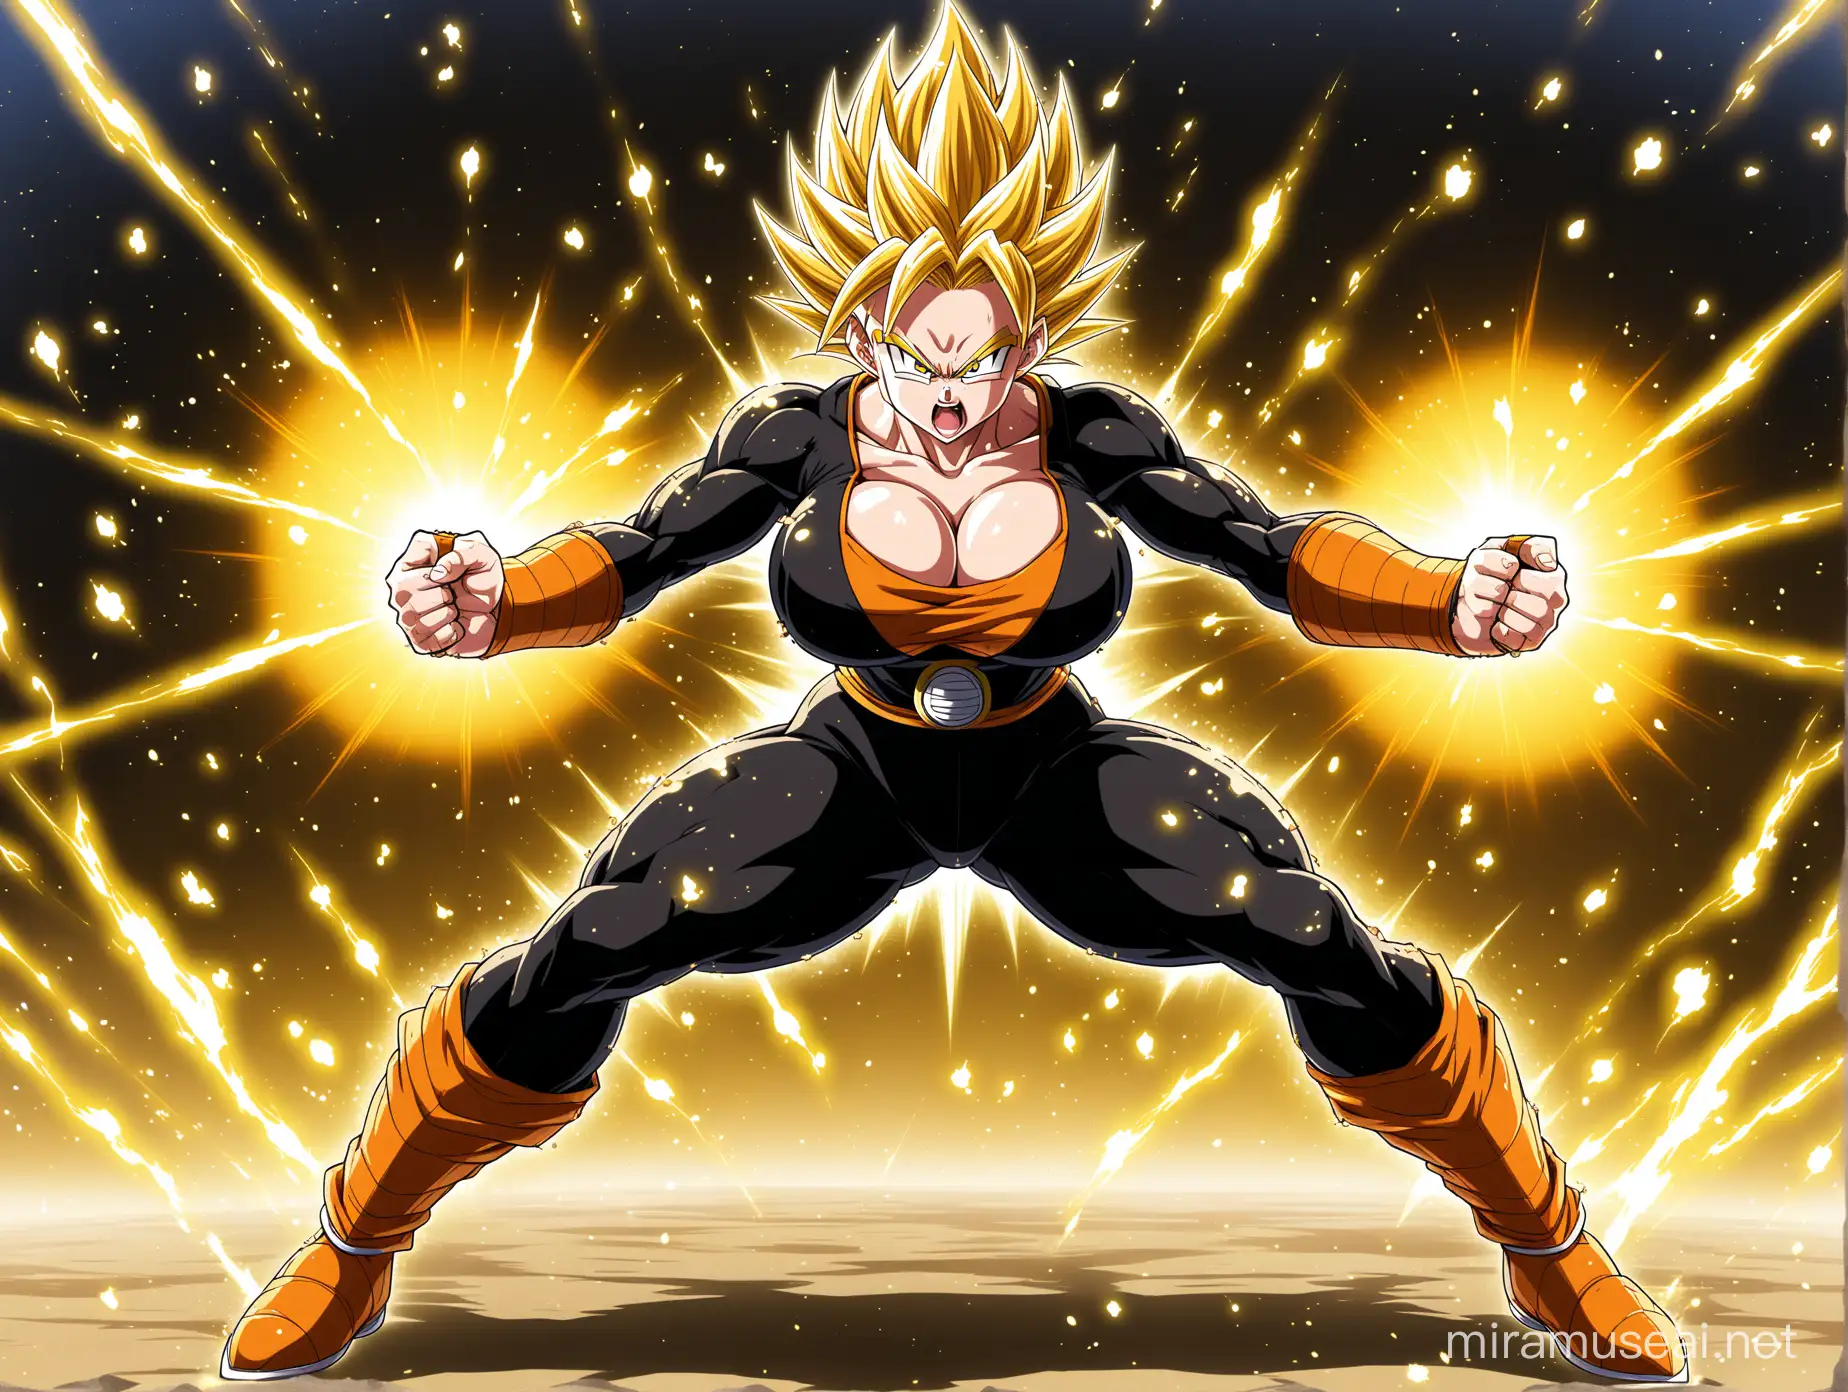 a female saiyan, black suit with red edges, angry, Gold hair, yellow power aura, power particles, dragon ball z, full body, huge breasts, strong legs.